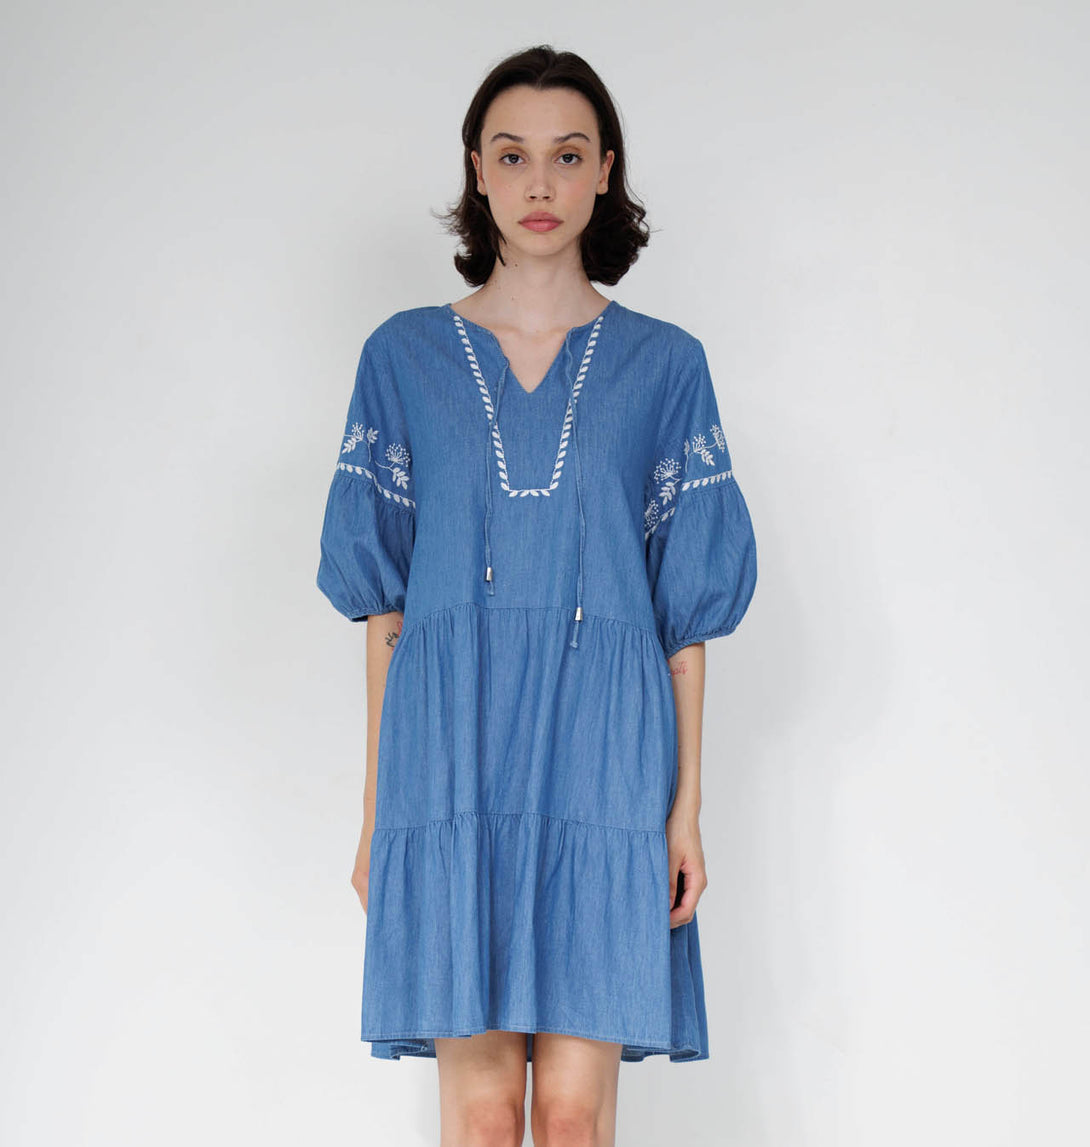 denim overall dress womens, HT 360 Collective, denim outfits for ladies, sexy denim outfit,